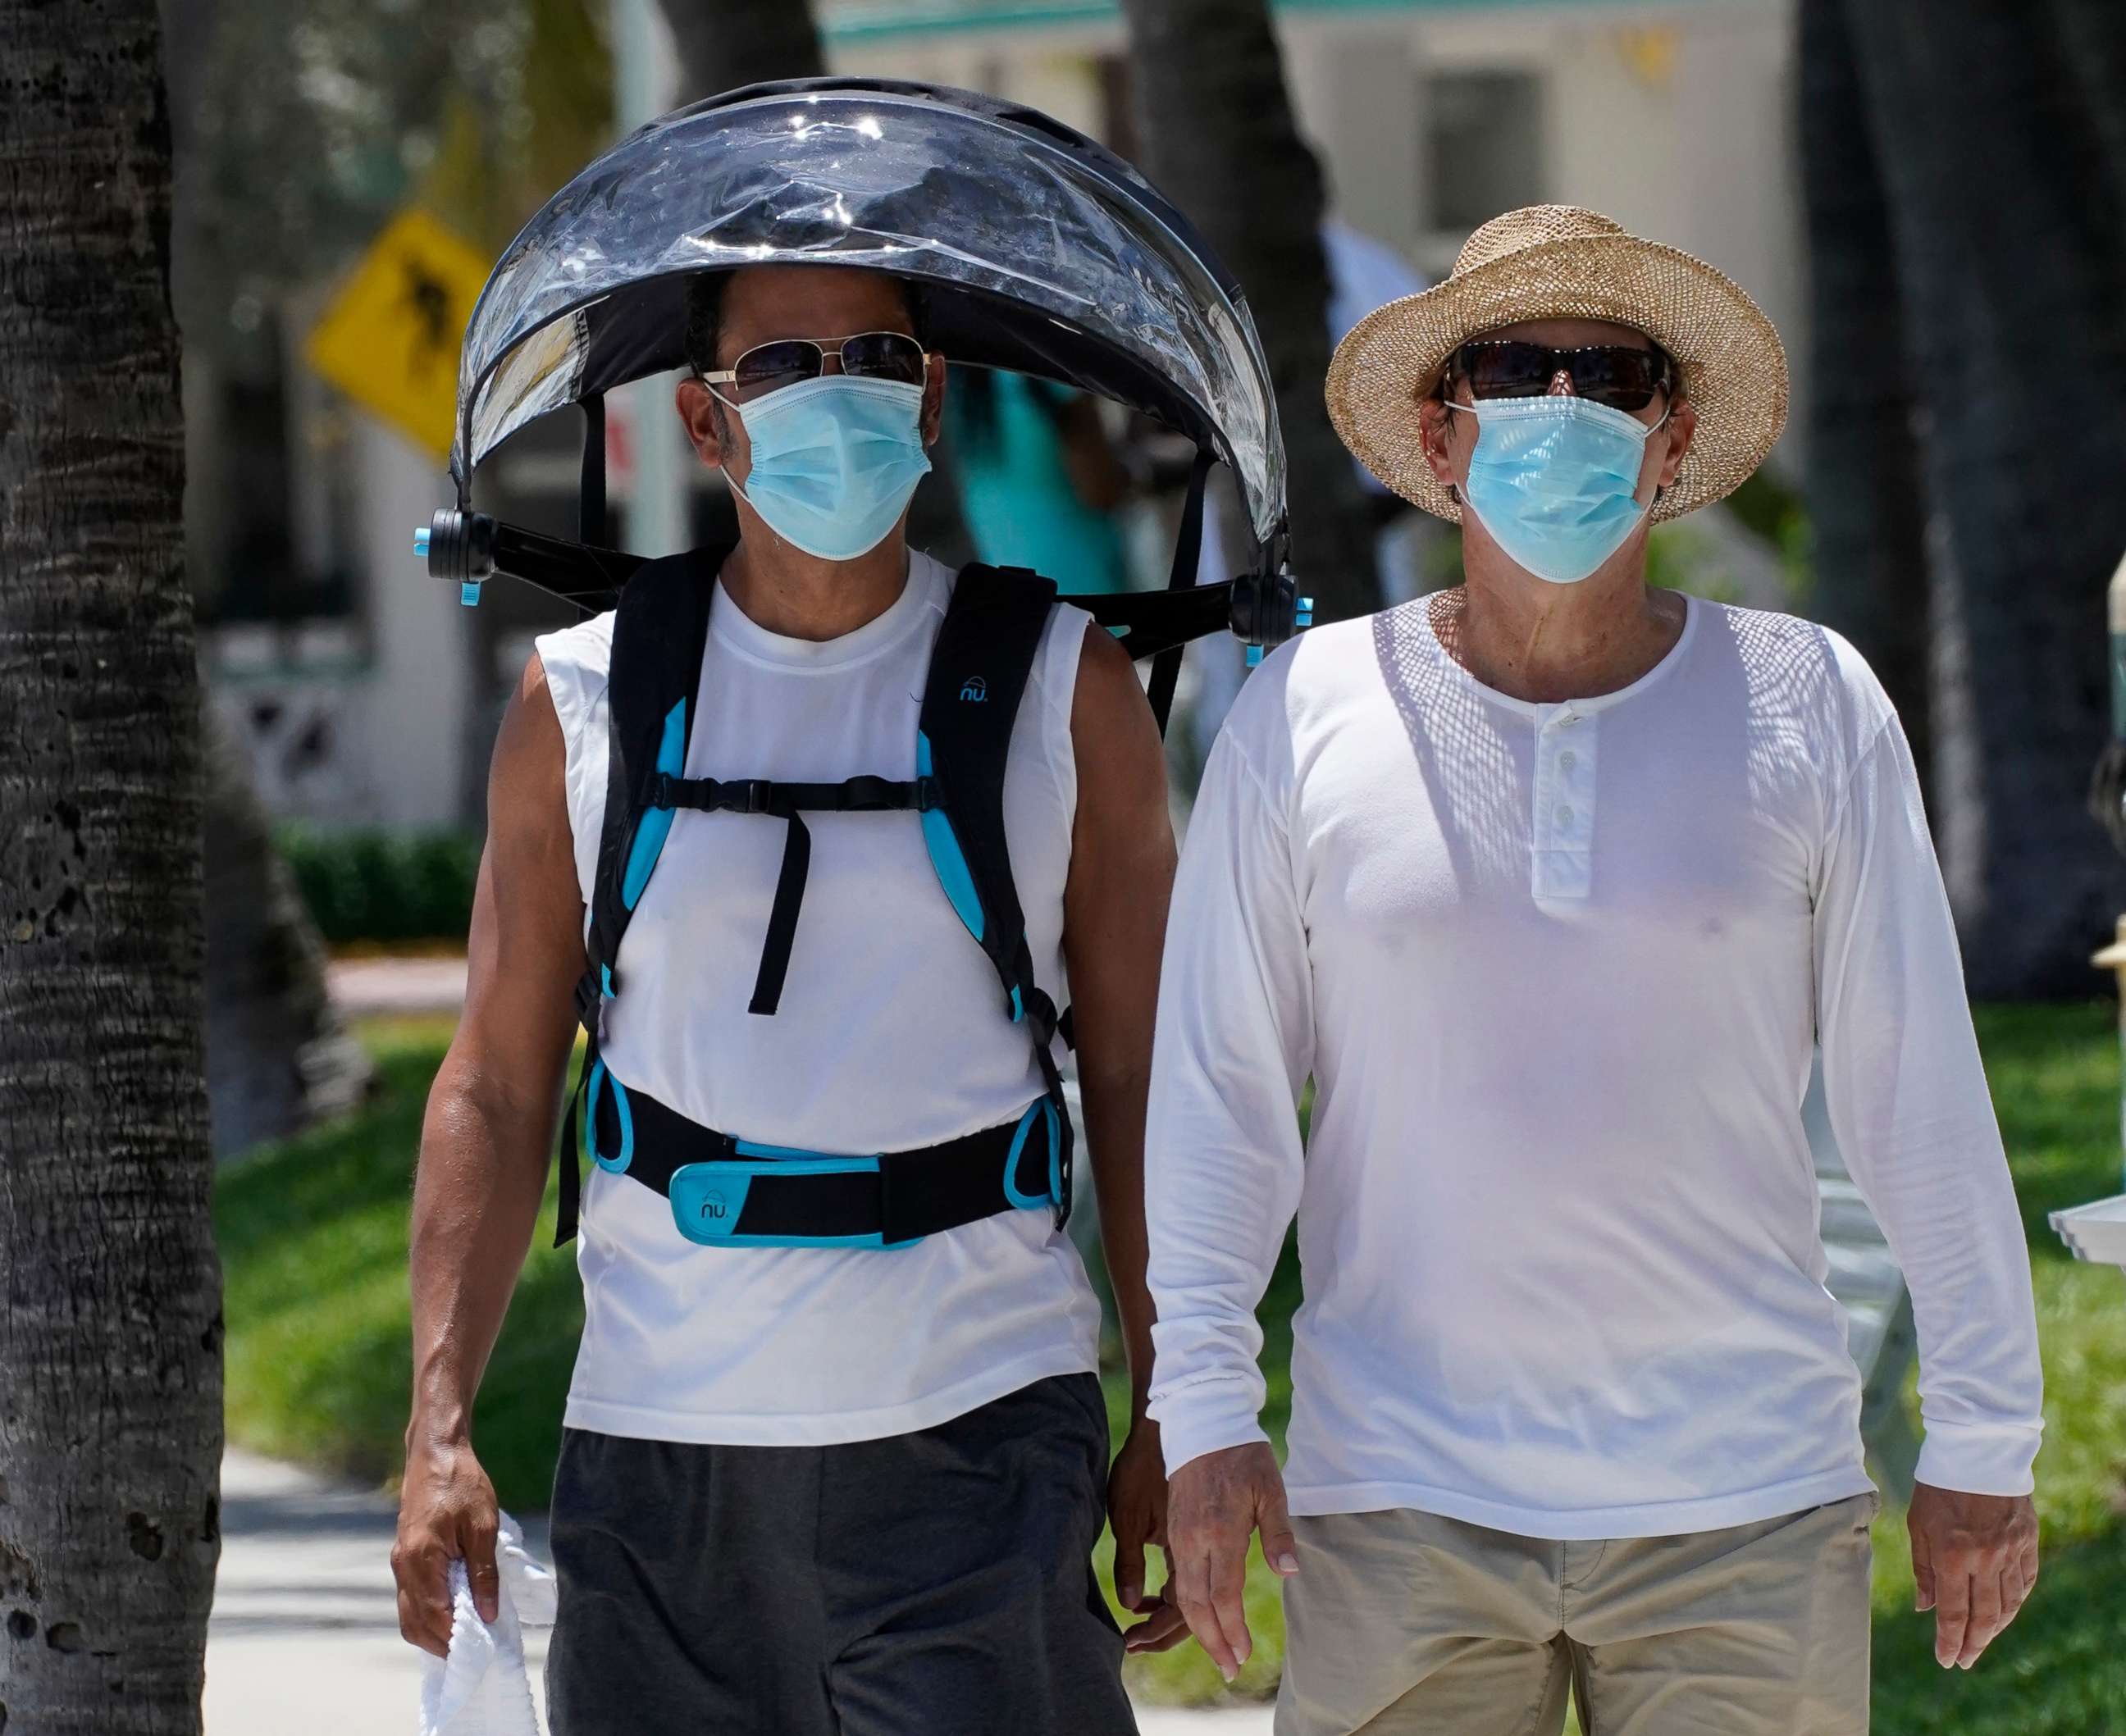 PHOTO: A pair of beach goers wear masks to prevent the spread of COVID-19, Aug. 11, 2020, in Miami Beach, Fla.